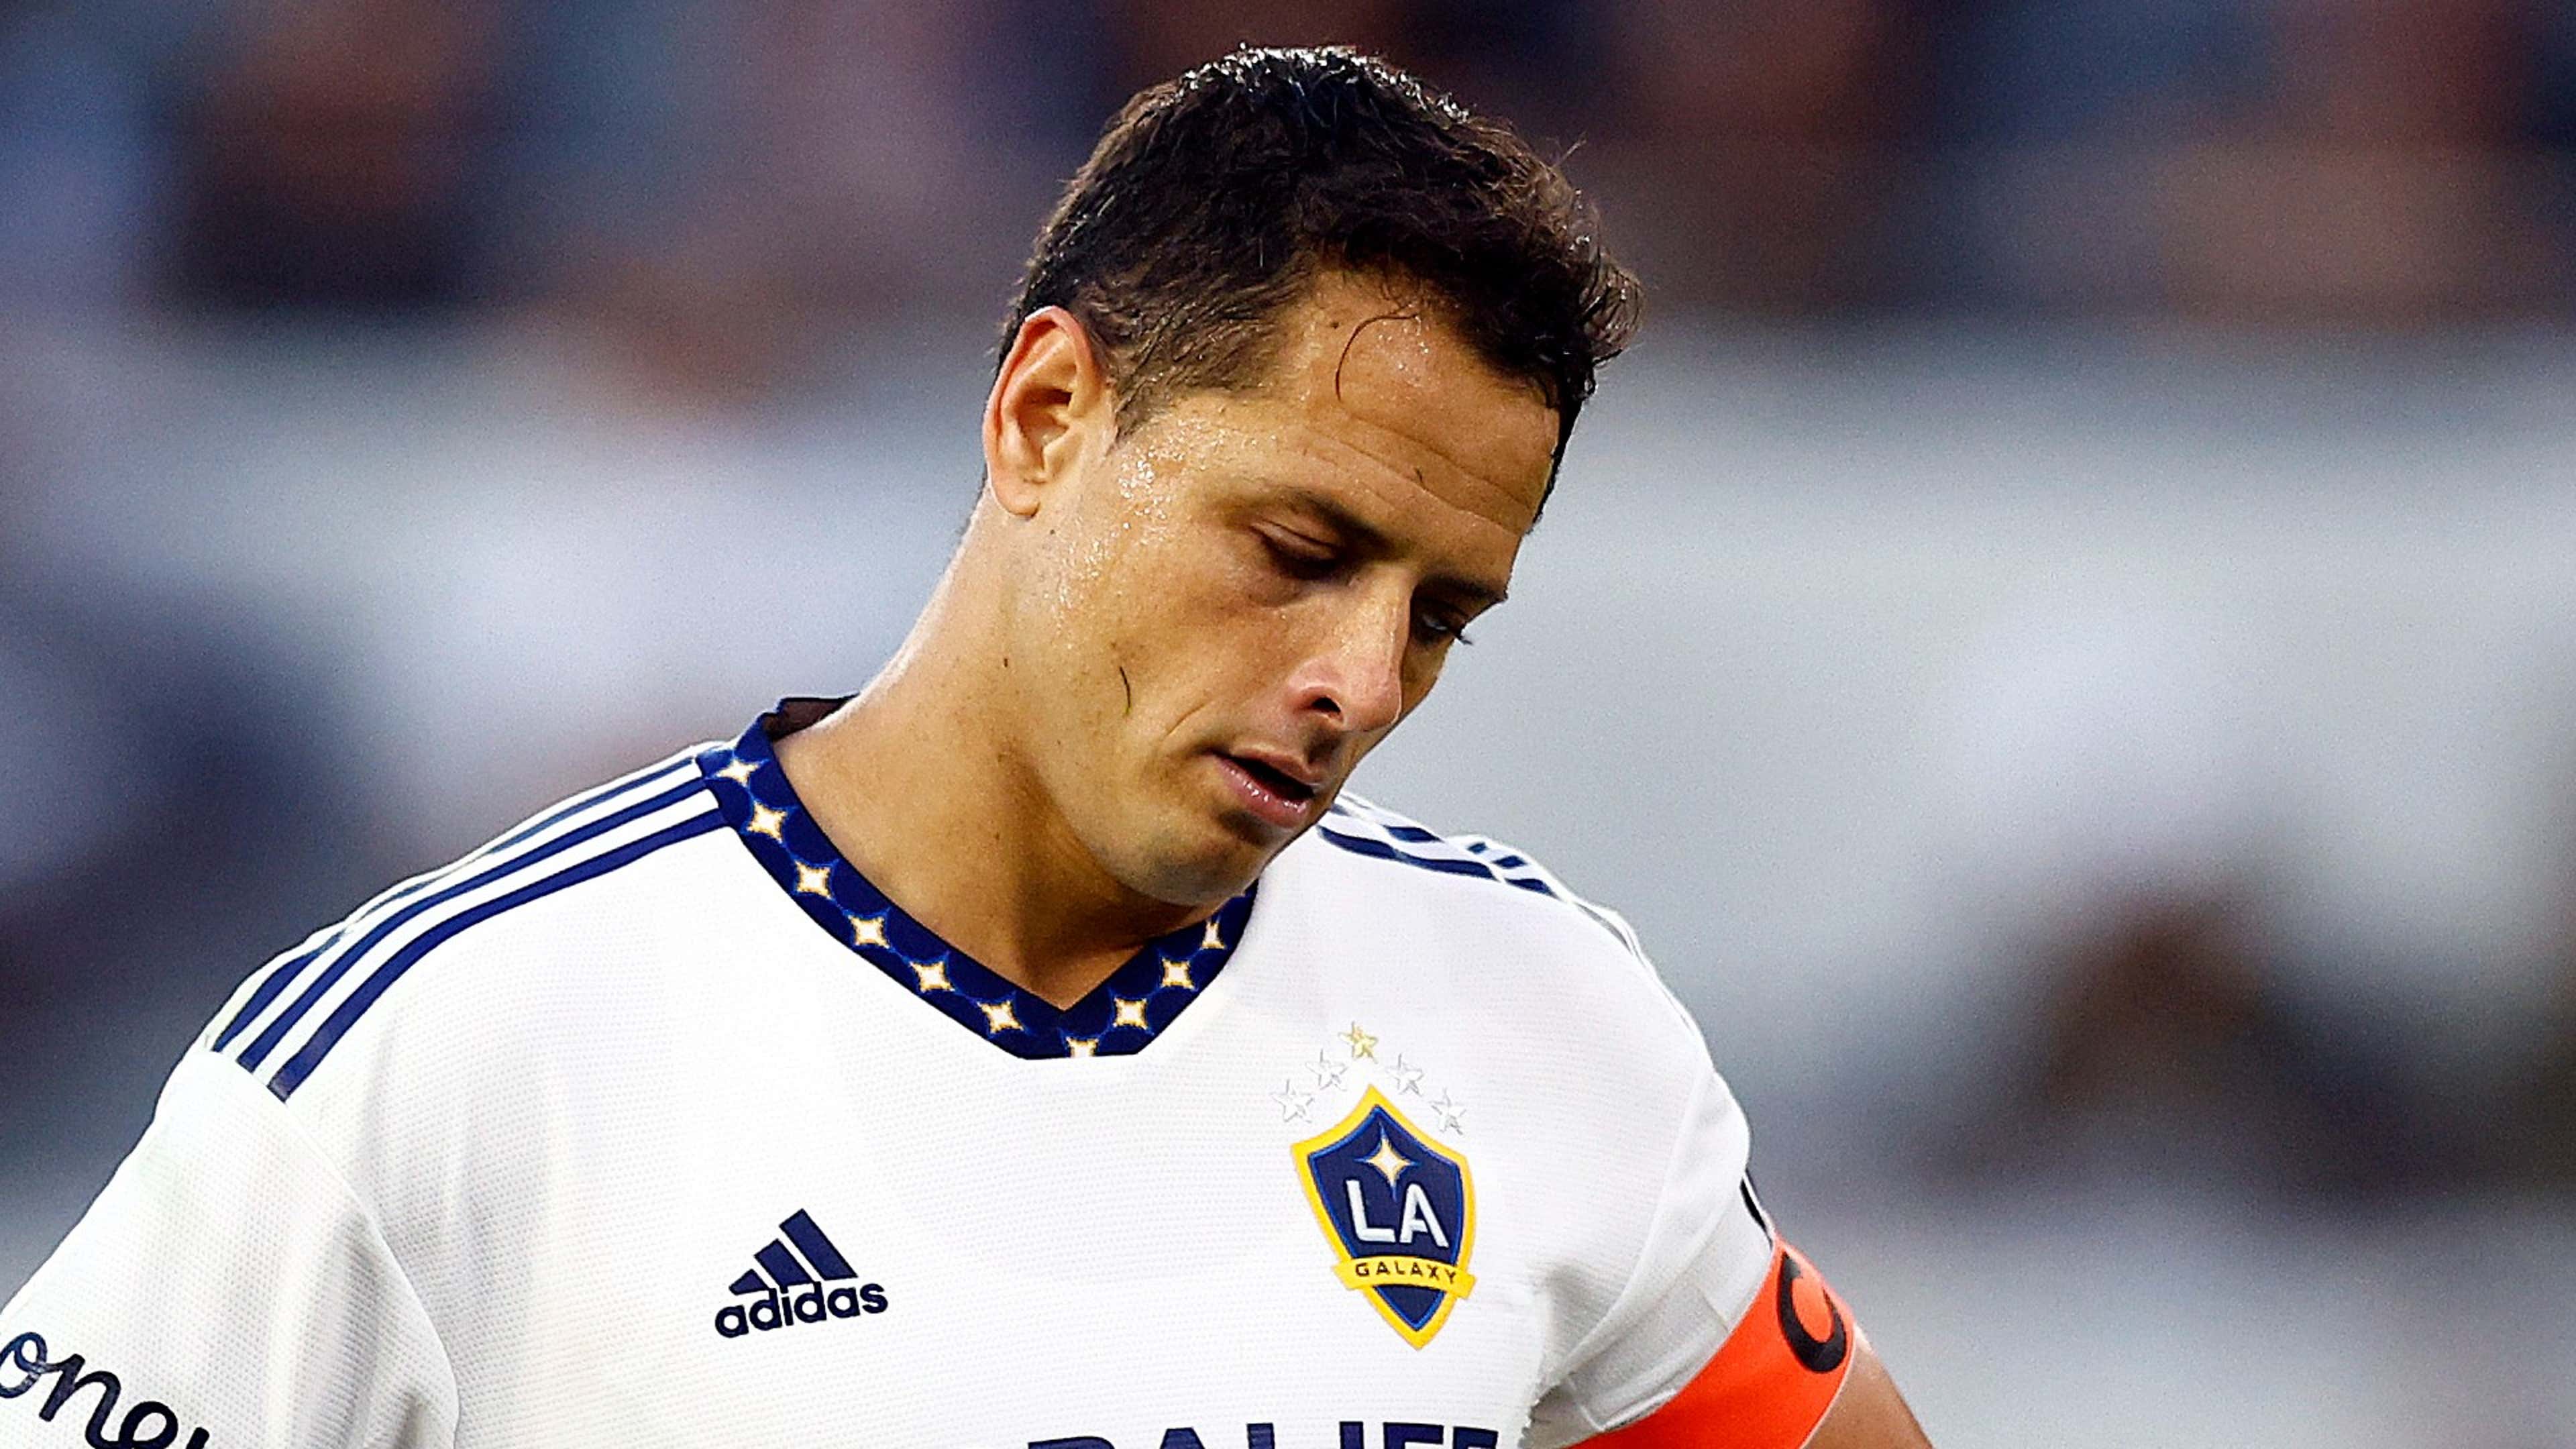 There's a time and a place' - Javier 'Chicharito' Hernandez scolded by LA  Galaxy coach for Twitch stream